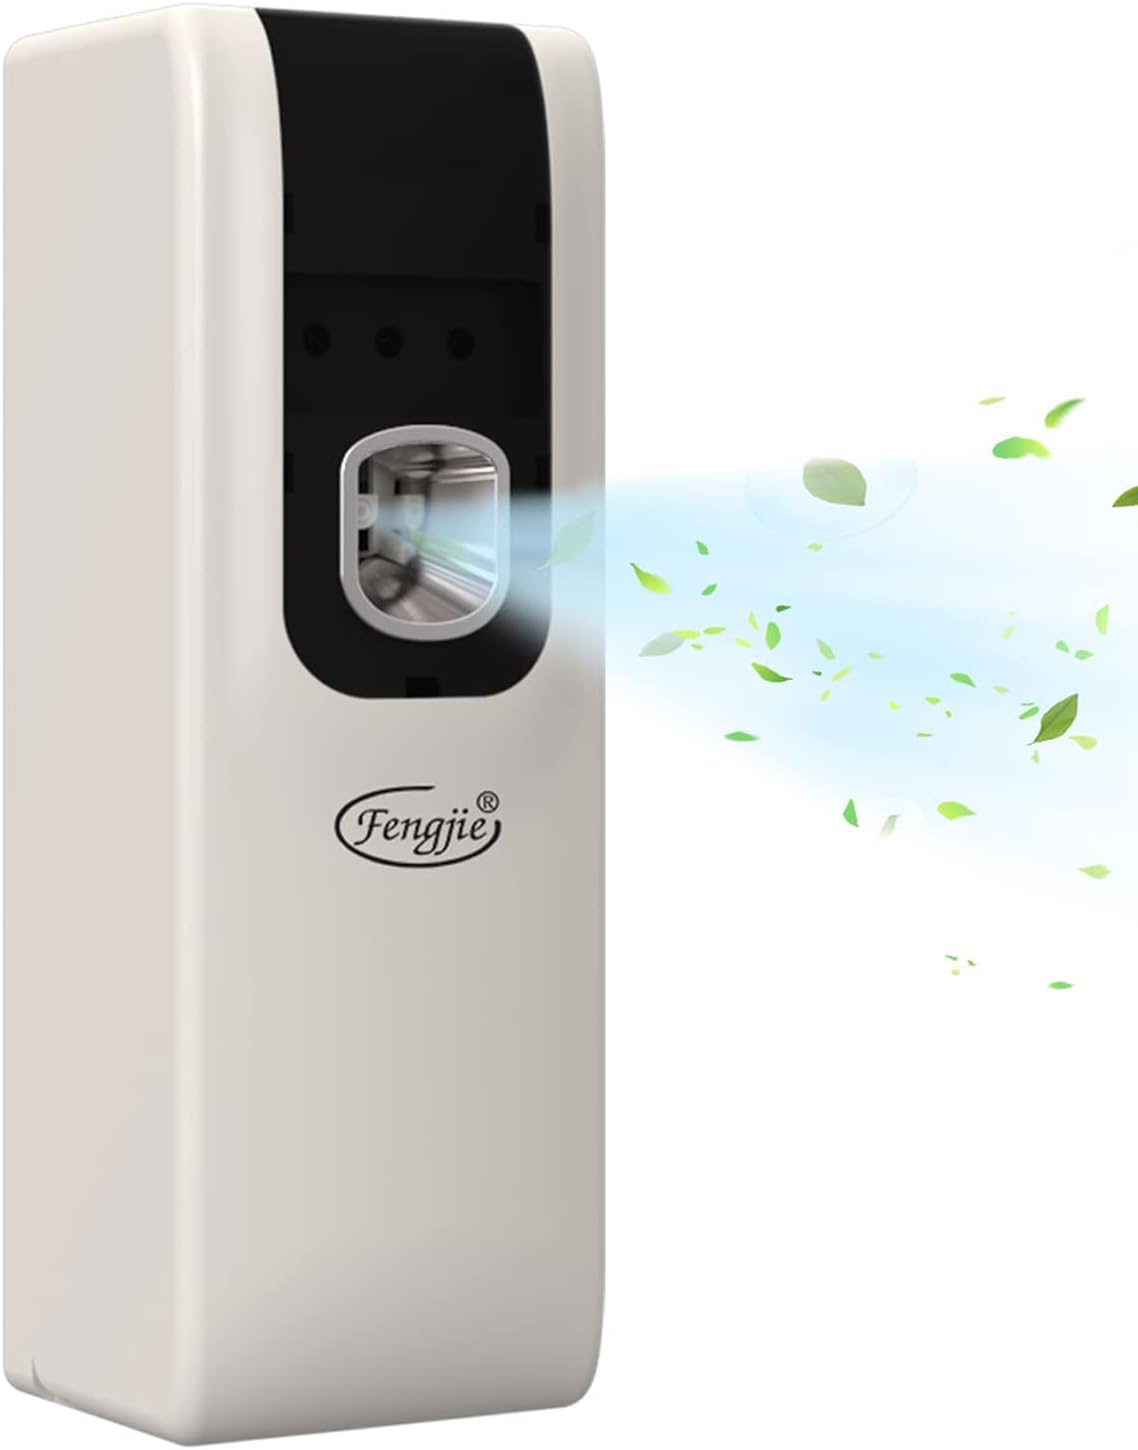 Automatic Air Freshener Spray Dispenser, FENGJIE Auto Air Fresheners Spray -Wall Mount/Free Standing Fragrance Dispenser for Home Room Office Hotel, Commercial Air Freshener Refill